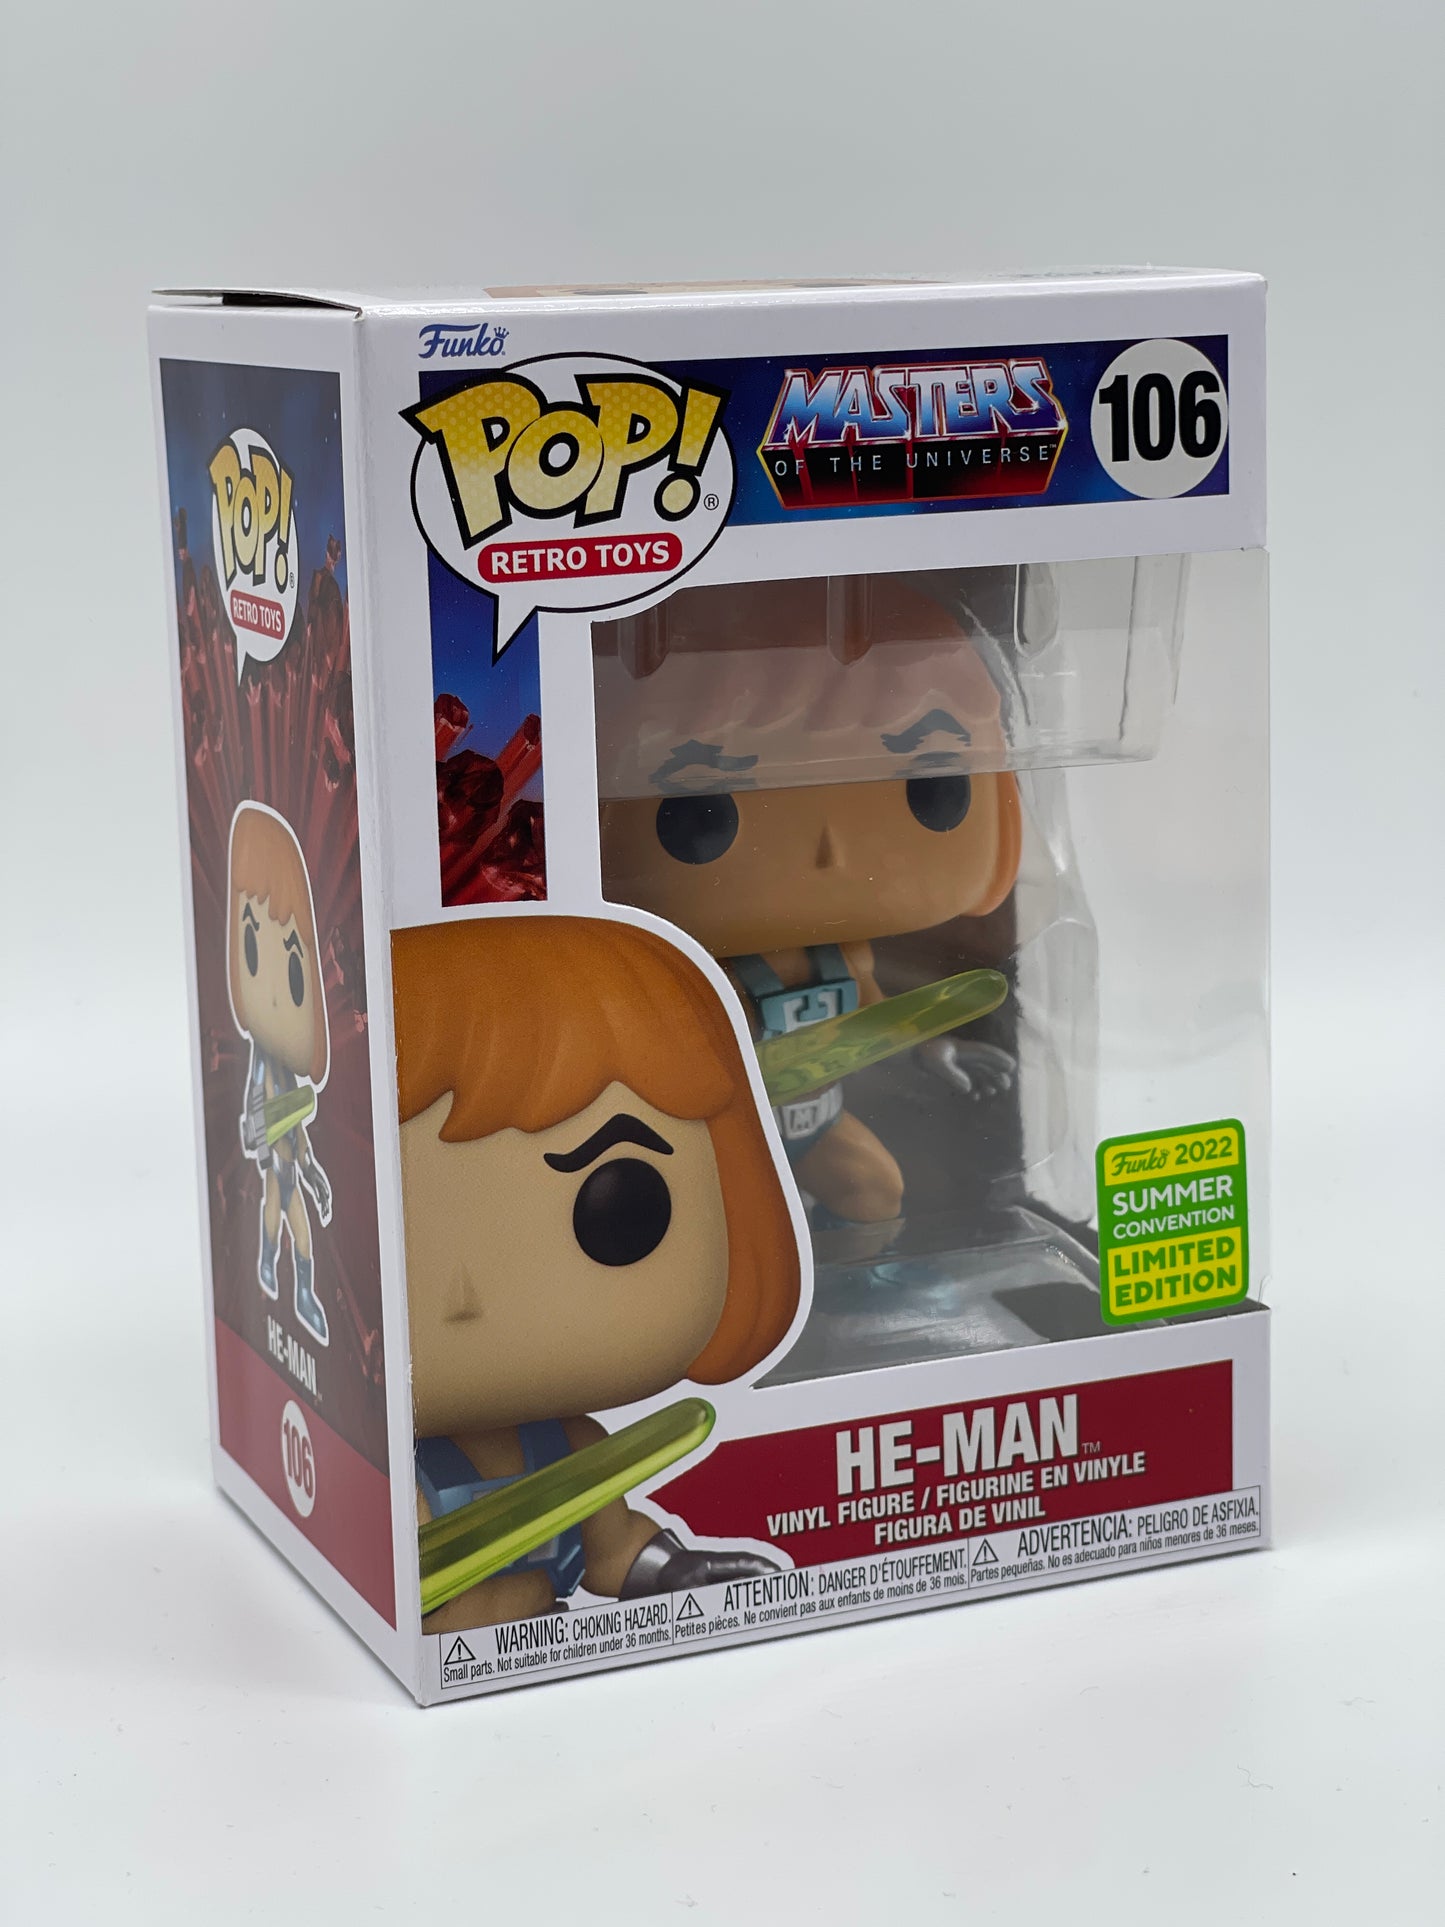 Funko Pop! Retro Toys "He-Man" #106 SDCC Exclusive Masters of the Universe 2022